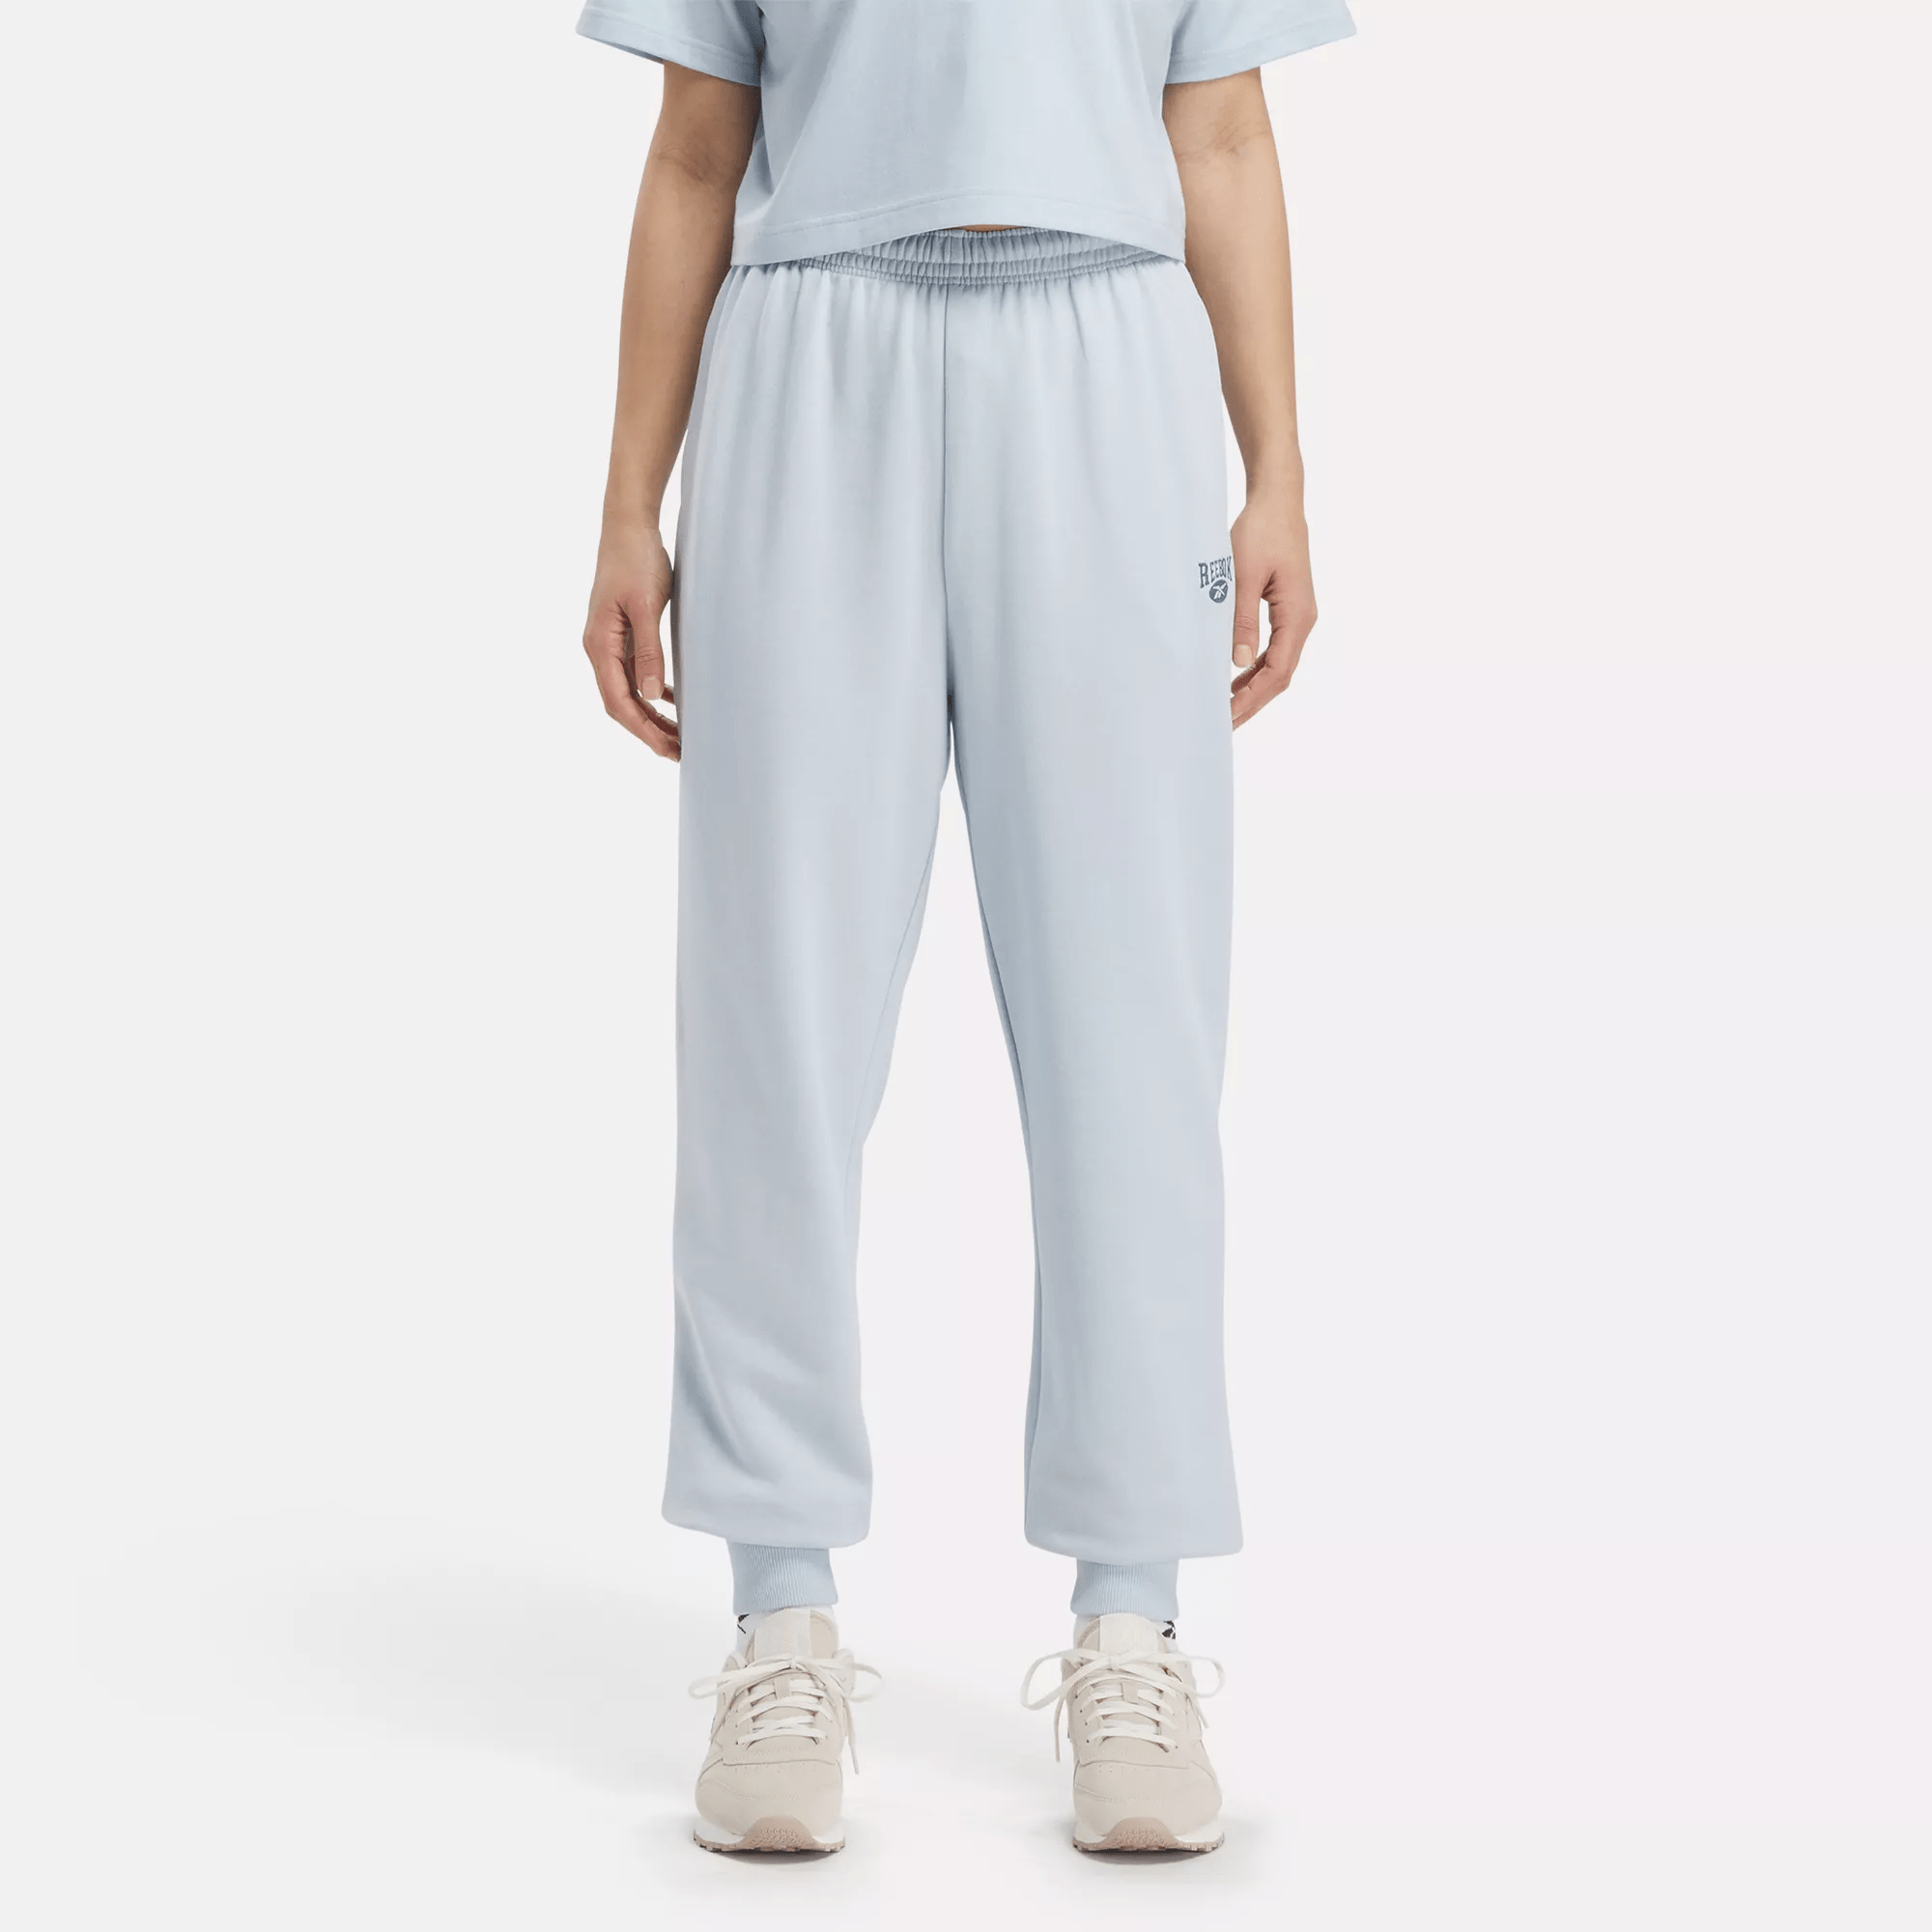 Reebok Classics Archive Essentials Fit French Terry Pants In Blue